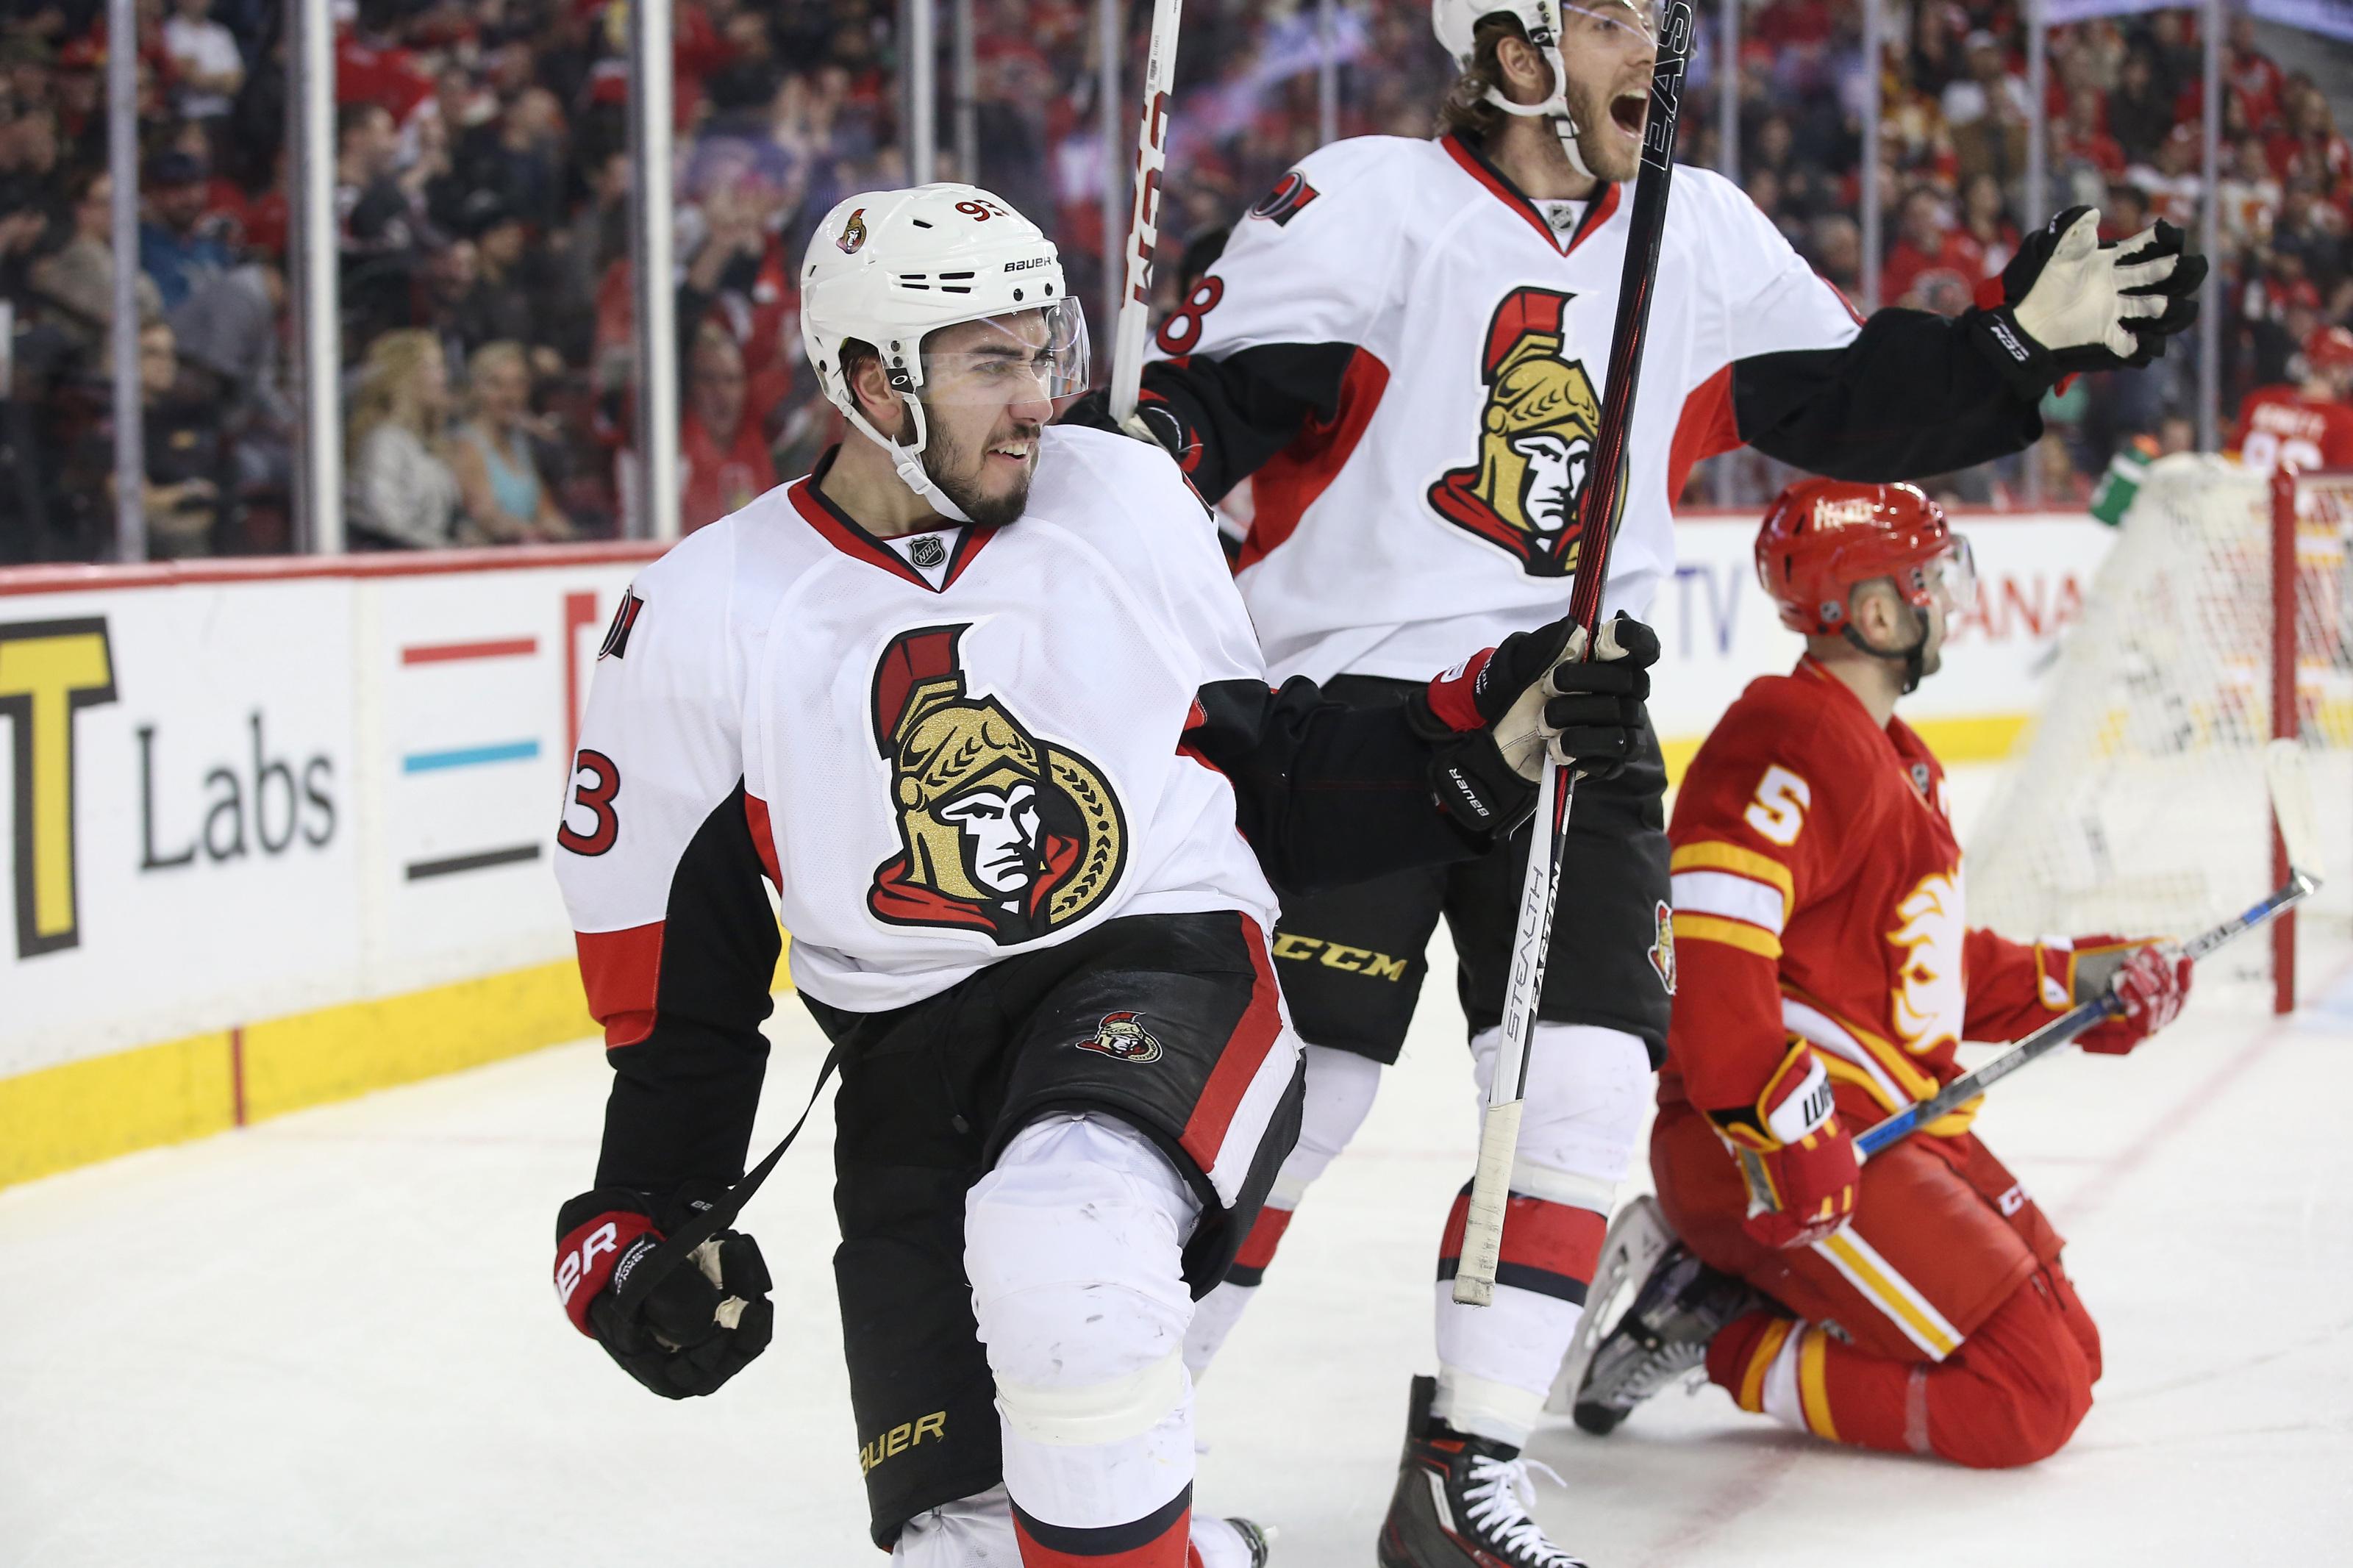 Four years later: Revisiting the Mika Zibanejad trade